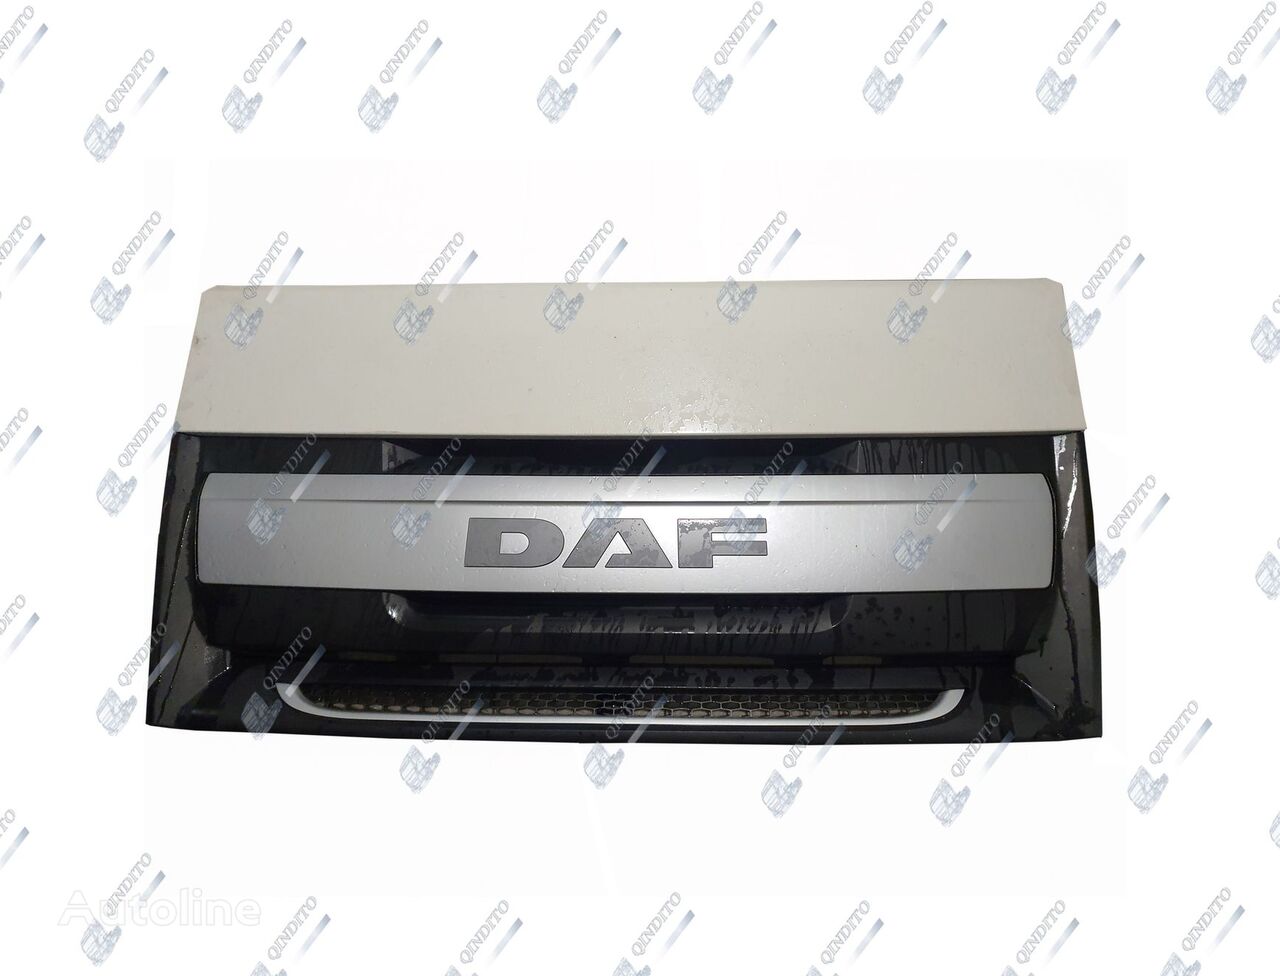 DAF 1835711 radiator grille for DAF  XF 106 truck tractor